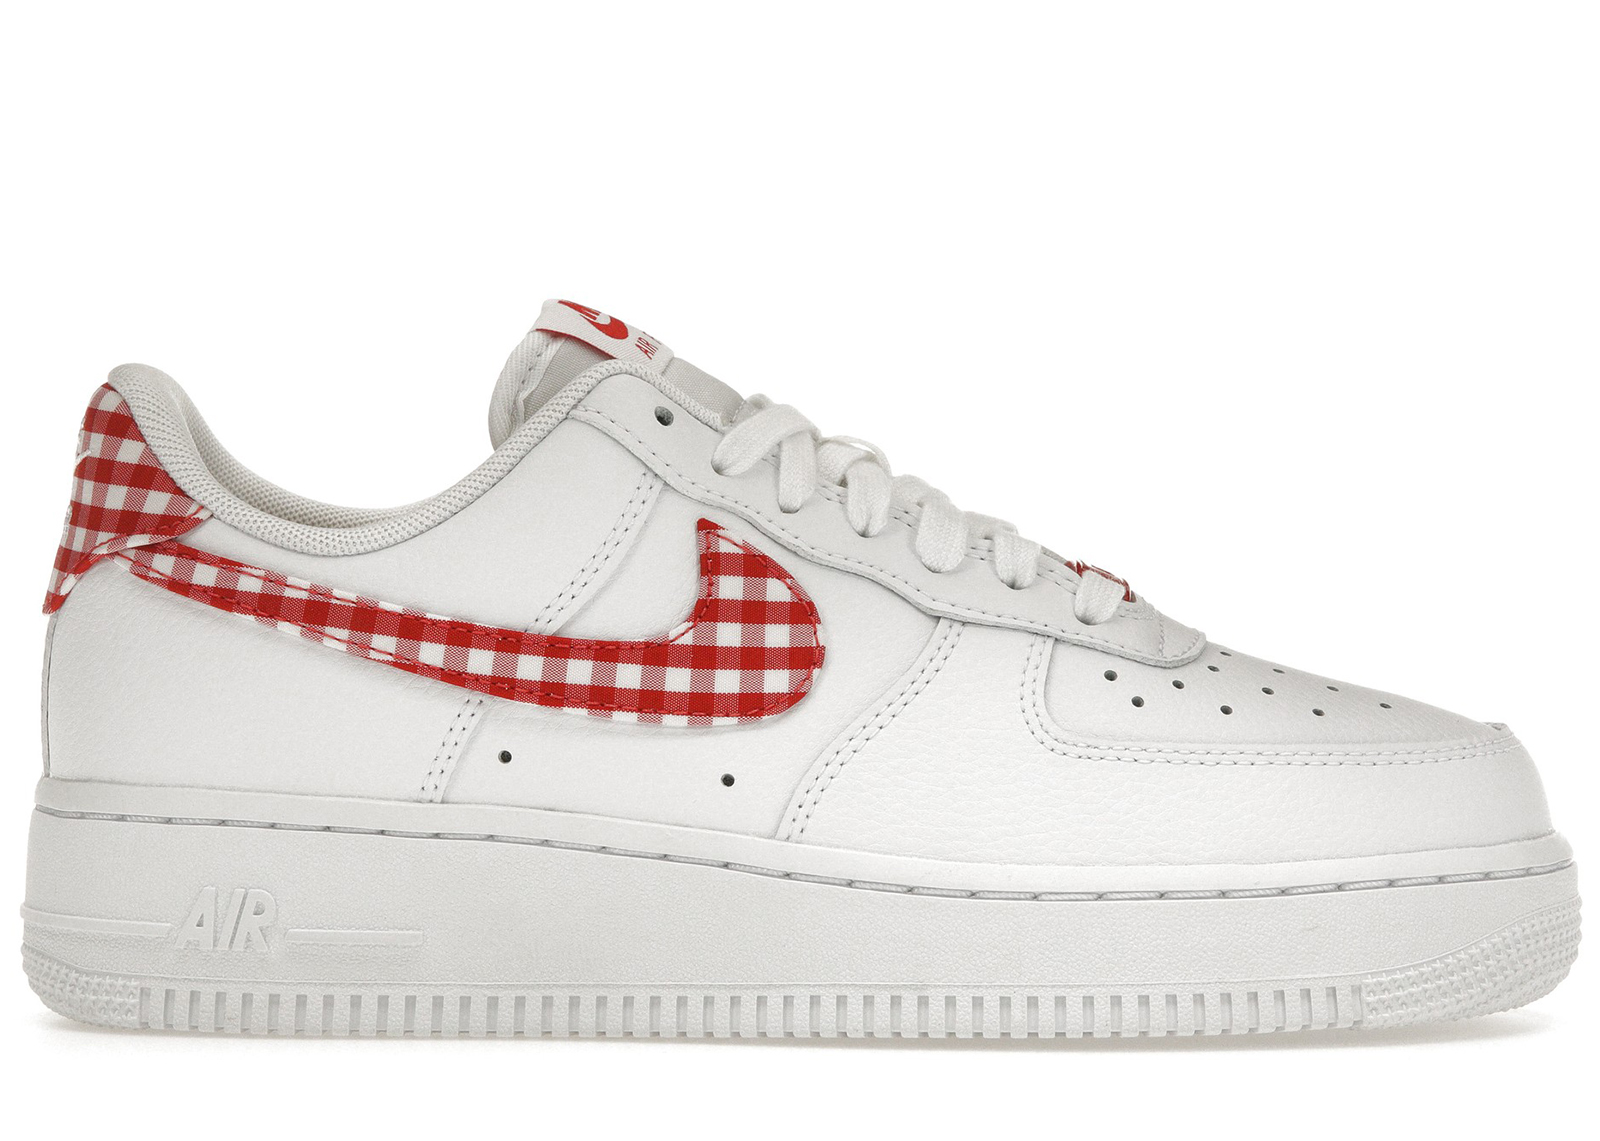 Nike Air Force 1 Low '07 Essential White Mystic Red Gingham (Women's)